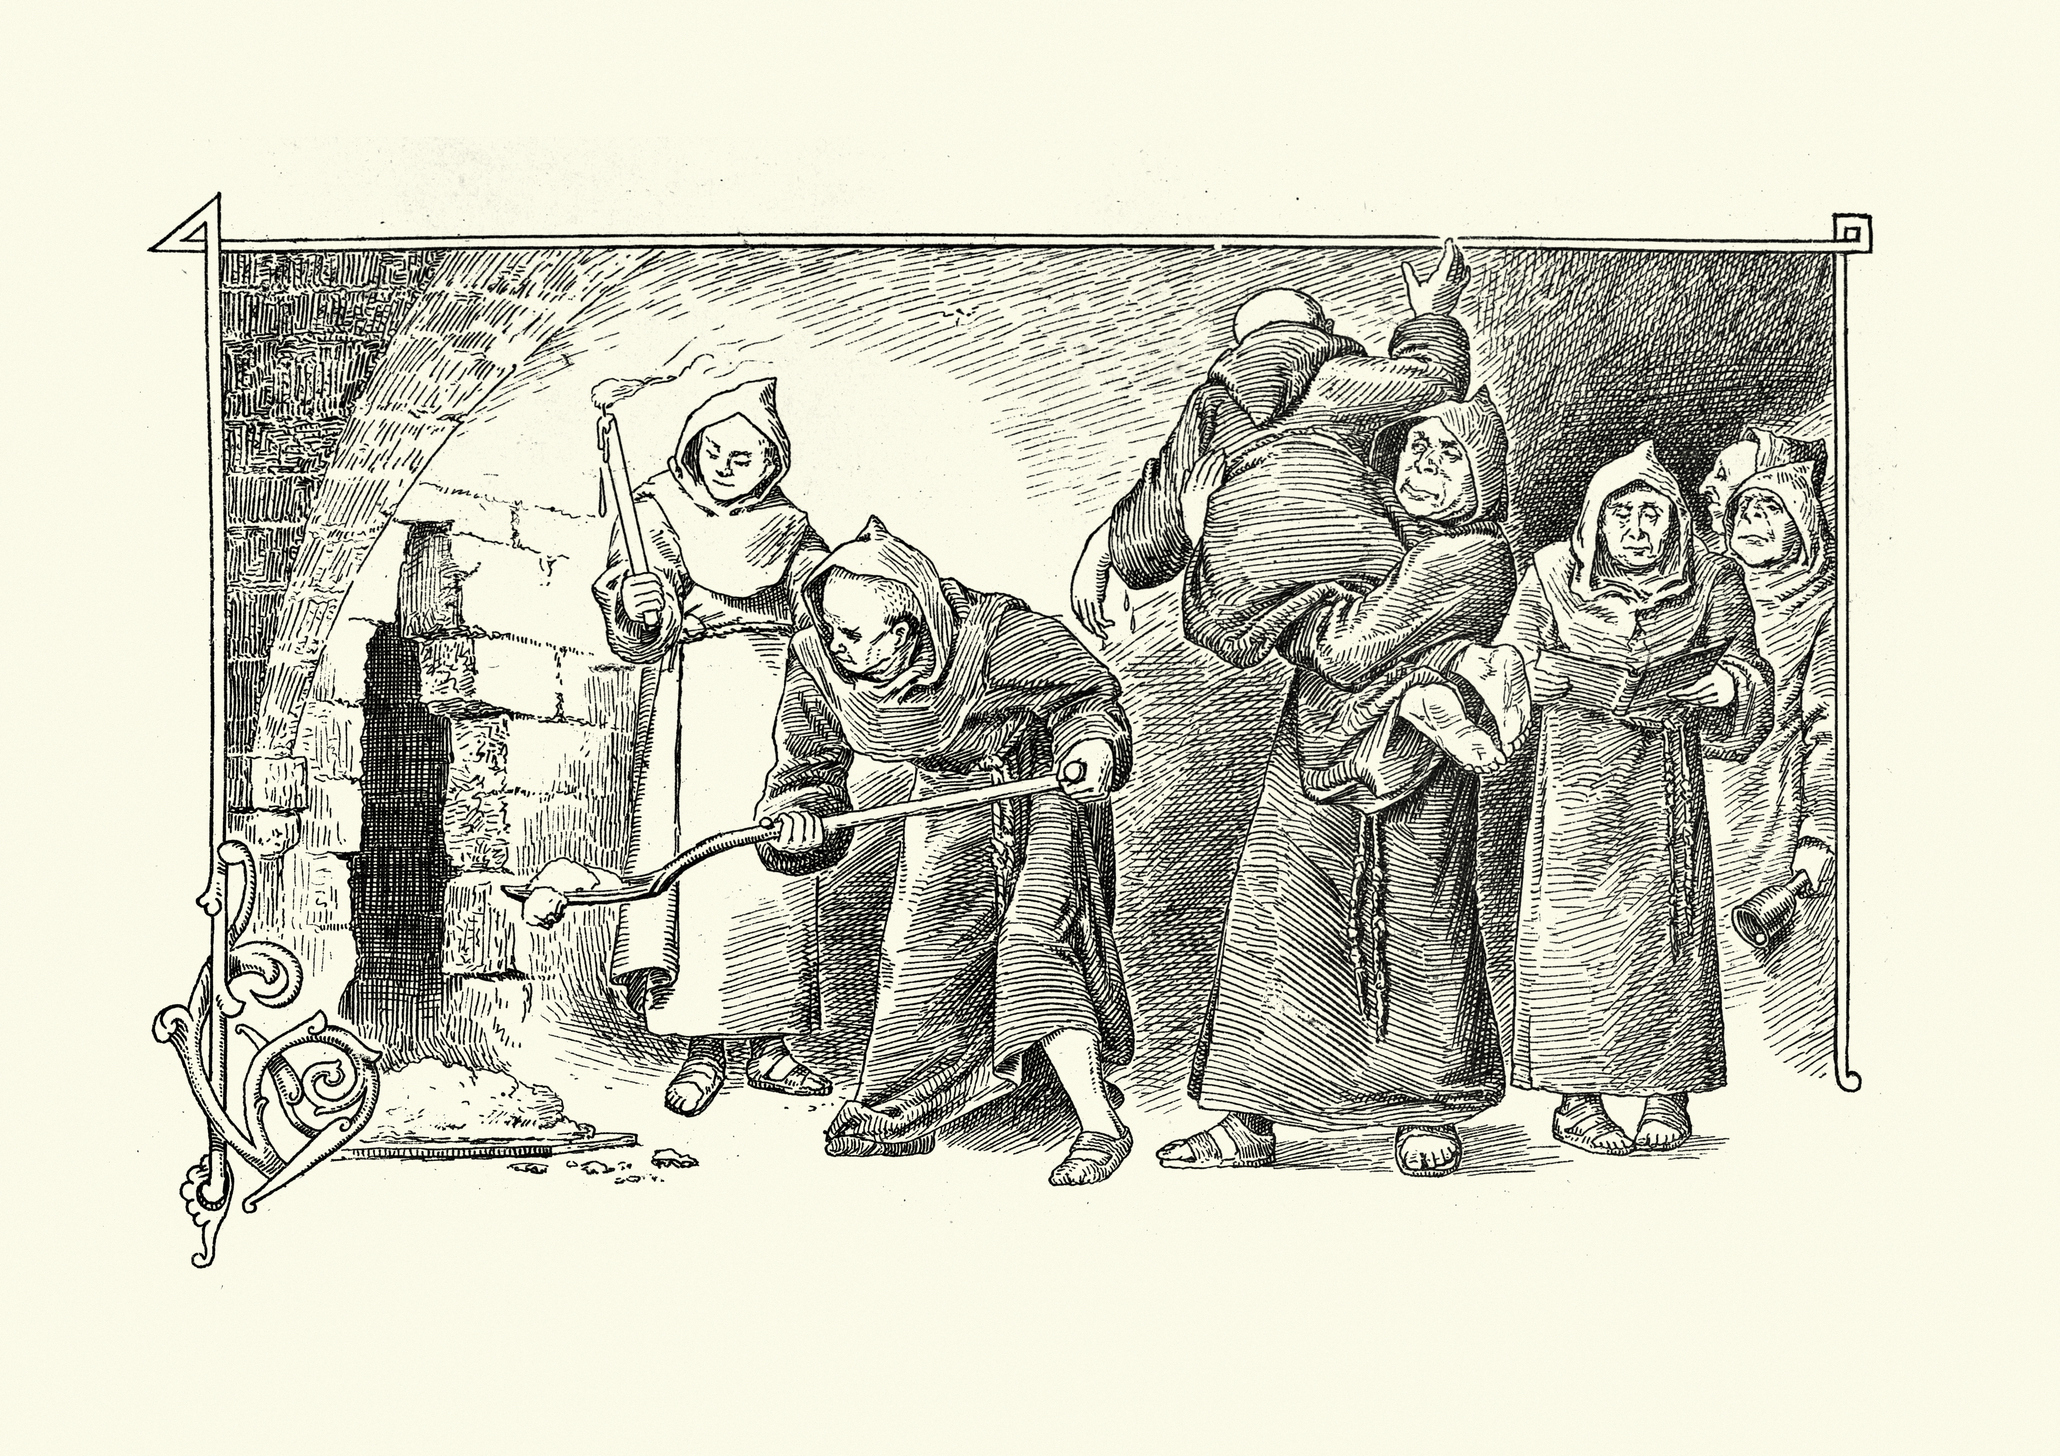 Illustration of medieval peasants working, some carrying bundles and one using a shovel